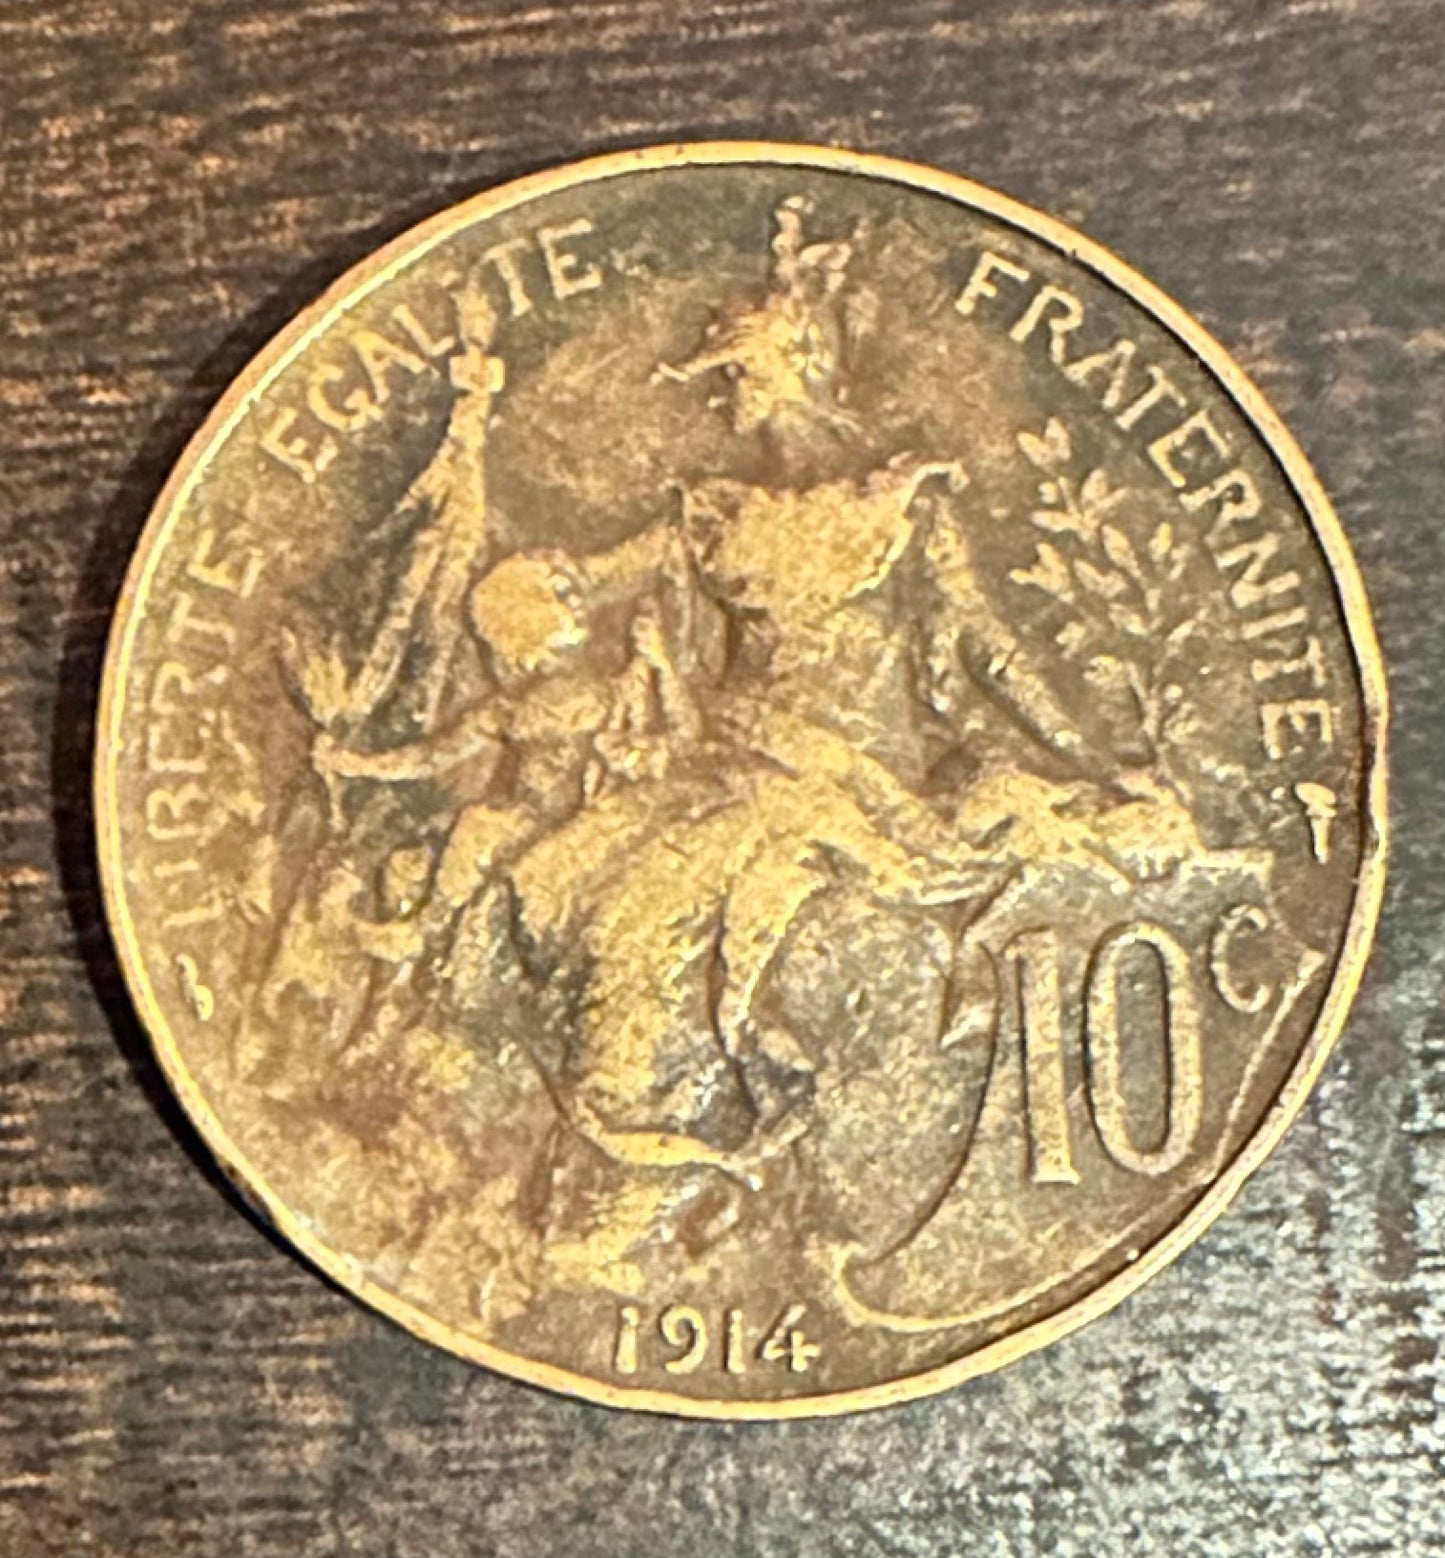 French Coin: 1914 5 Centimes